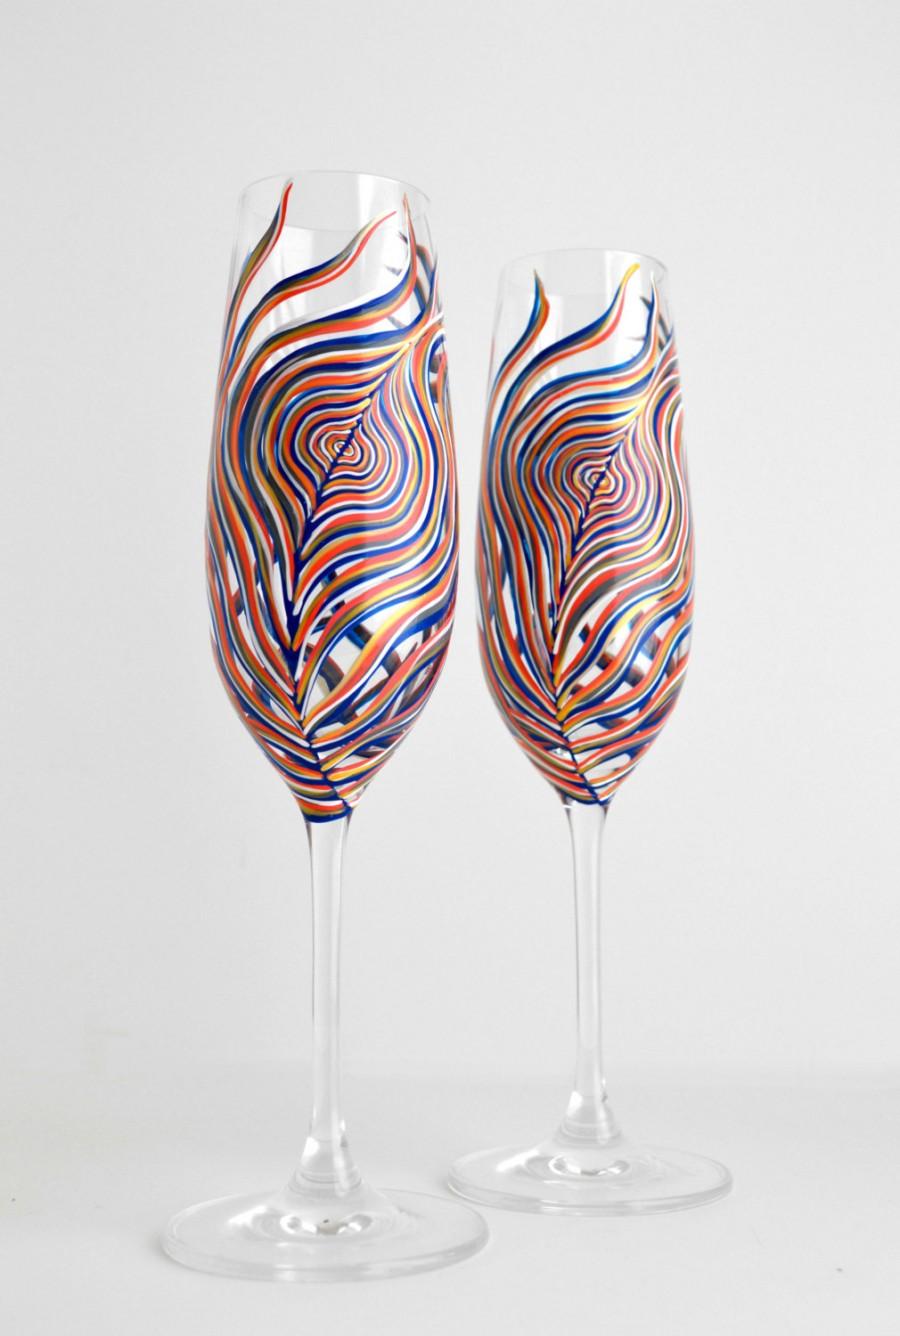 Свадьба - Navy, Gray and Coral Peacock Feather Champagne Flutes - Set of 2 Personalized Peacock Toasting Flutes - Hand Painted Wedding Flutes